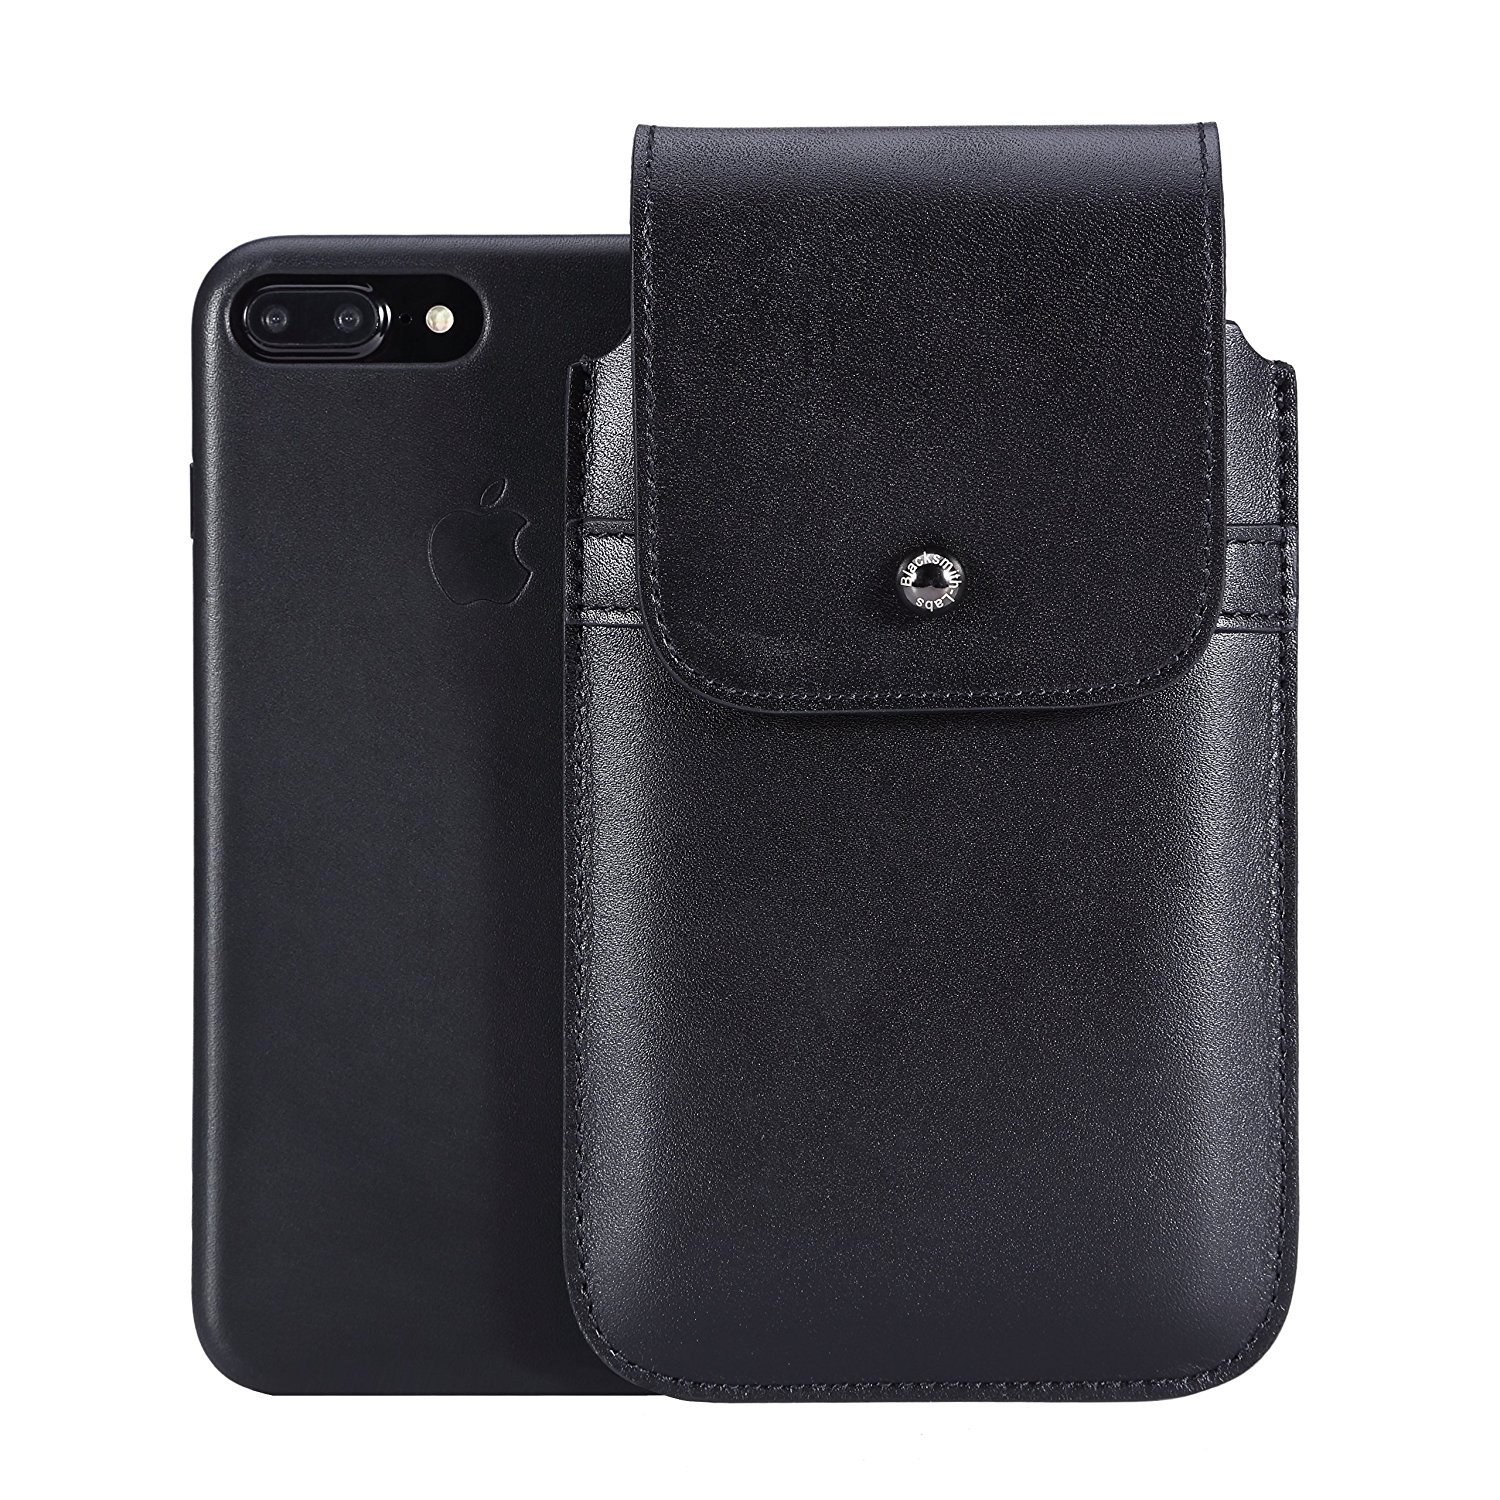 Blacksmith-Labs Holster Case for iPhone 6 Plus; iPhone 6s Plus, iPhone 7 Plus - Black